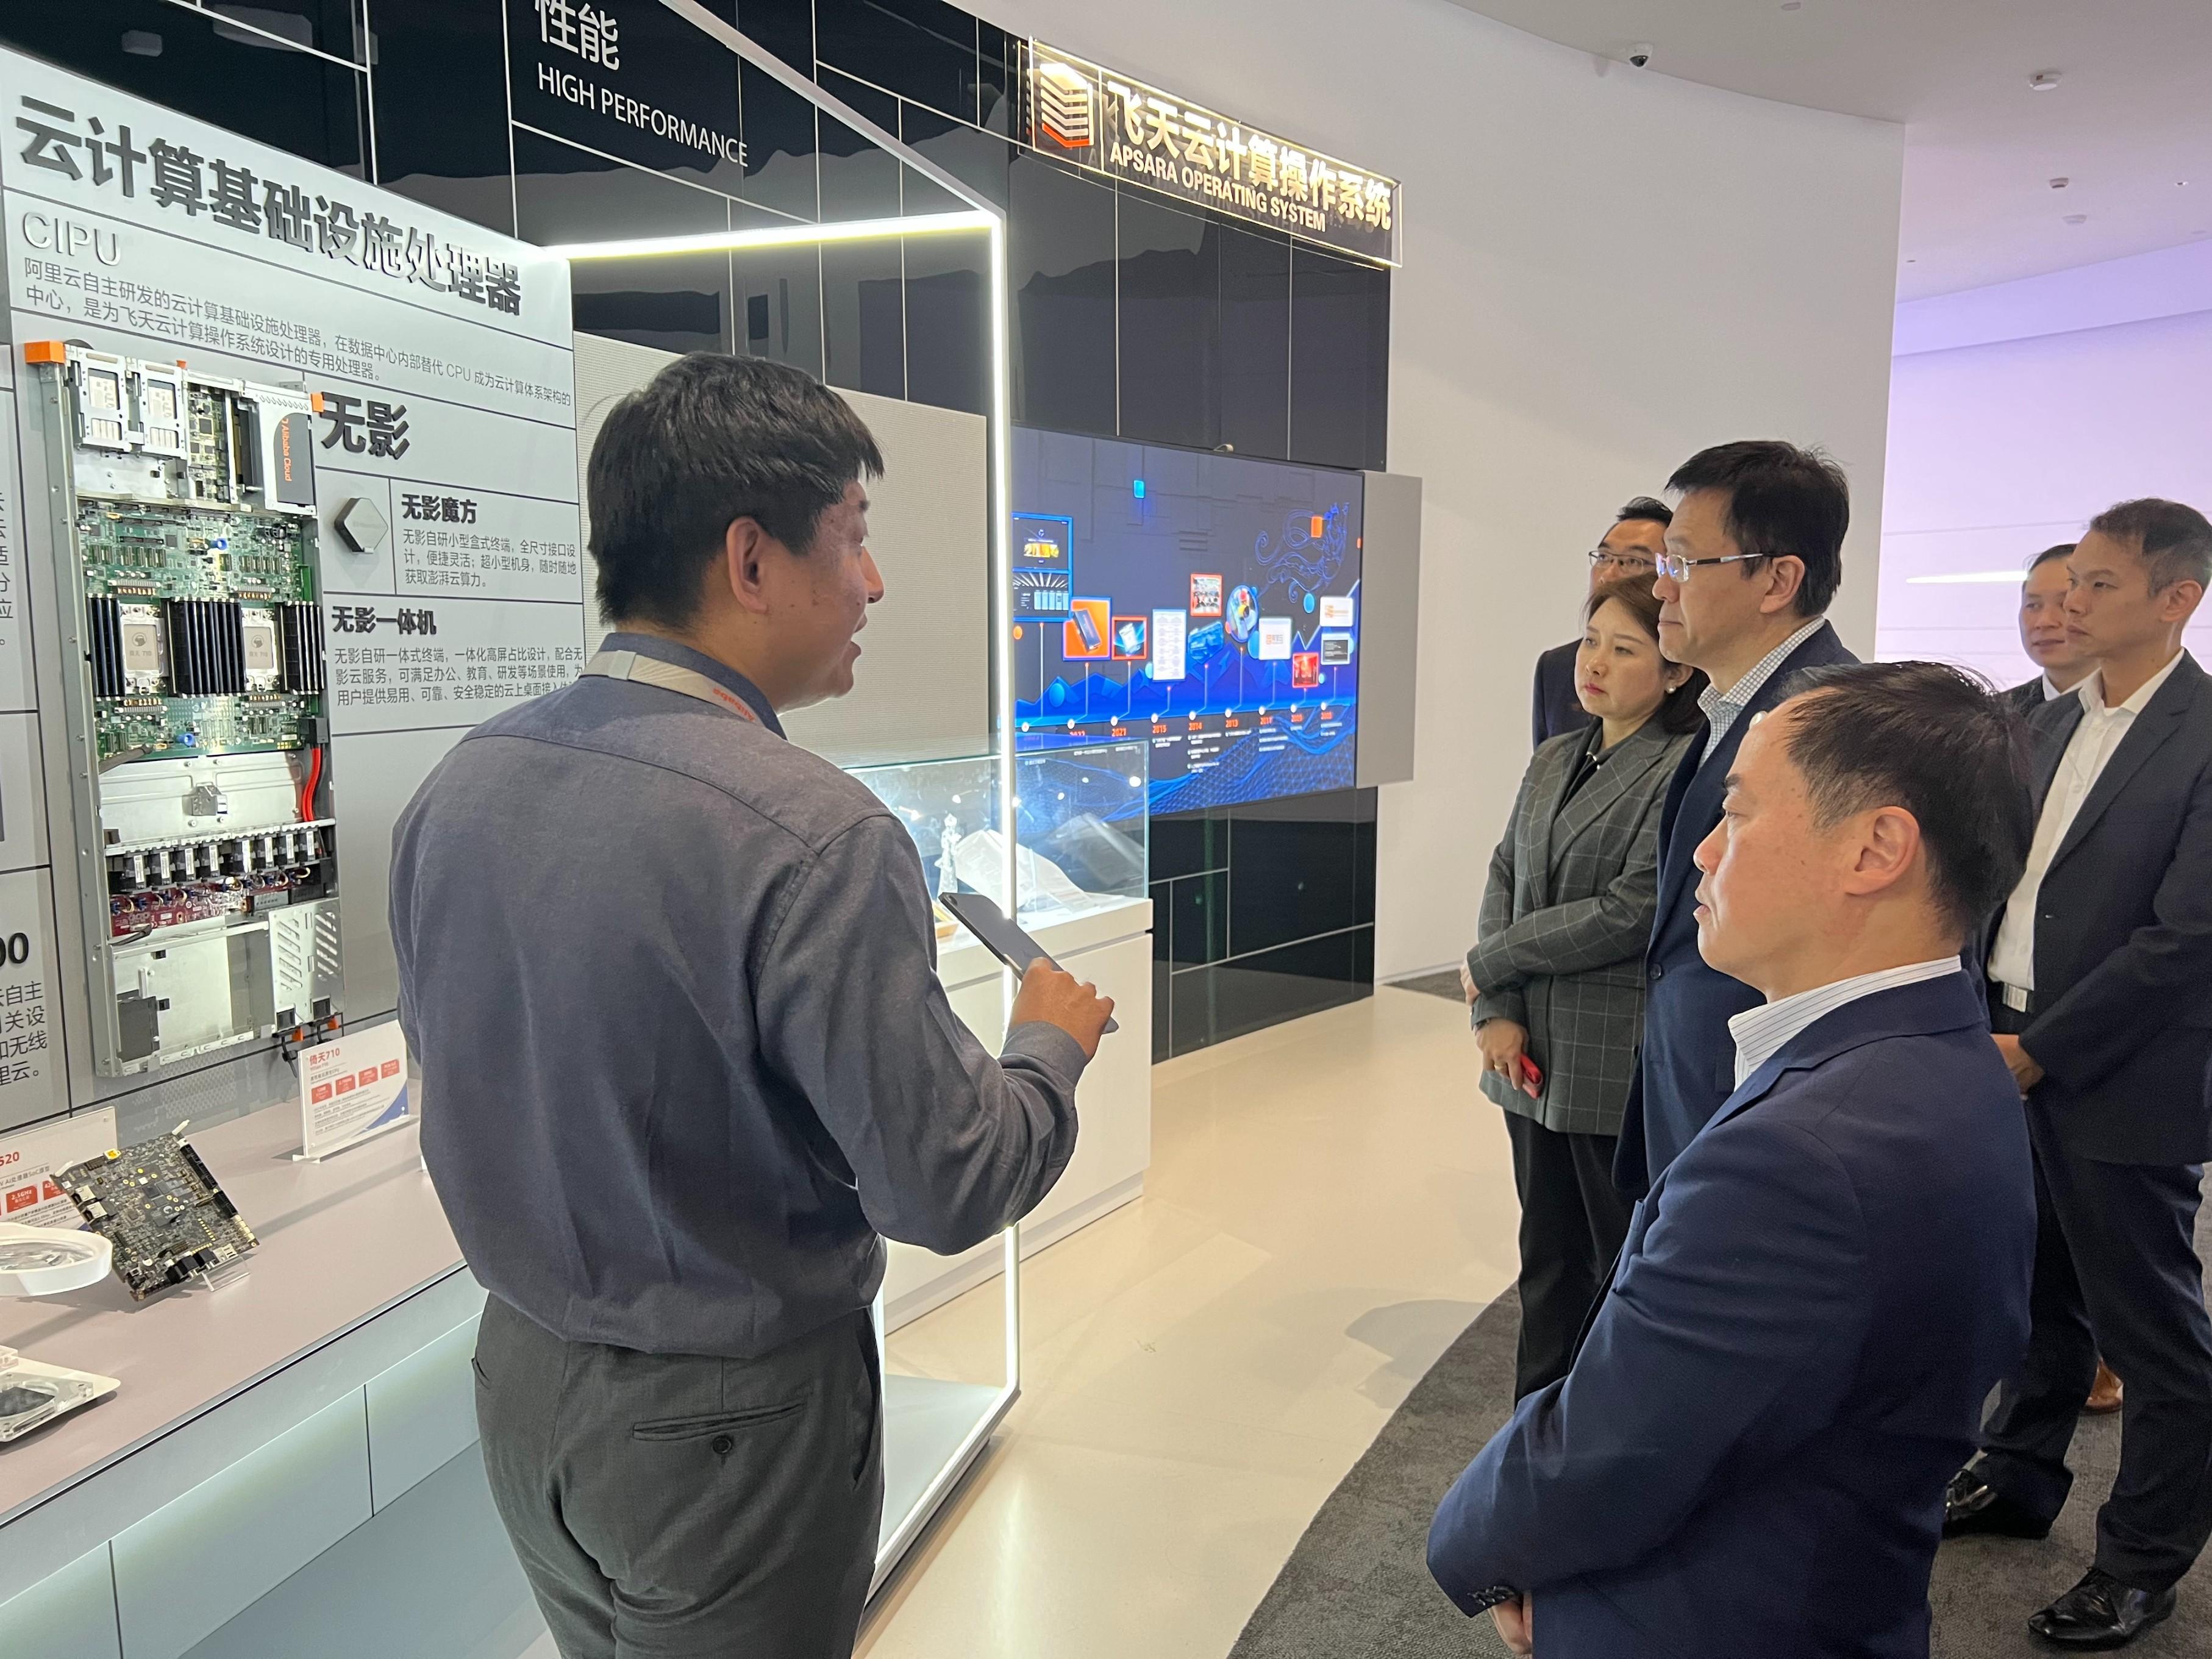 The Secretary for Innovation, Technology and Industry, Professor Sun Dong (fourth right), visits the Alibaba Cloud Valley Park in Hangzhou today (November 8), and is briefed by the park’s management on the operation of the cloud computing infrastructure and operating systems. Next to Professor Sun is the Government Chief Information Officer, Mr Tony Wong (third right).